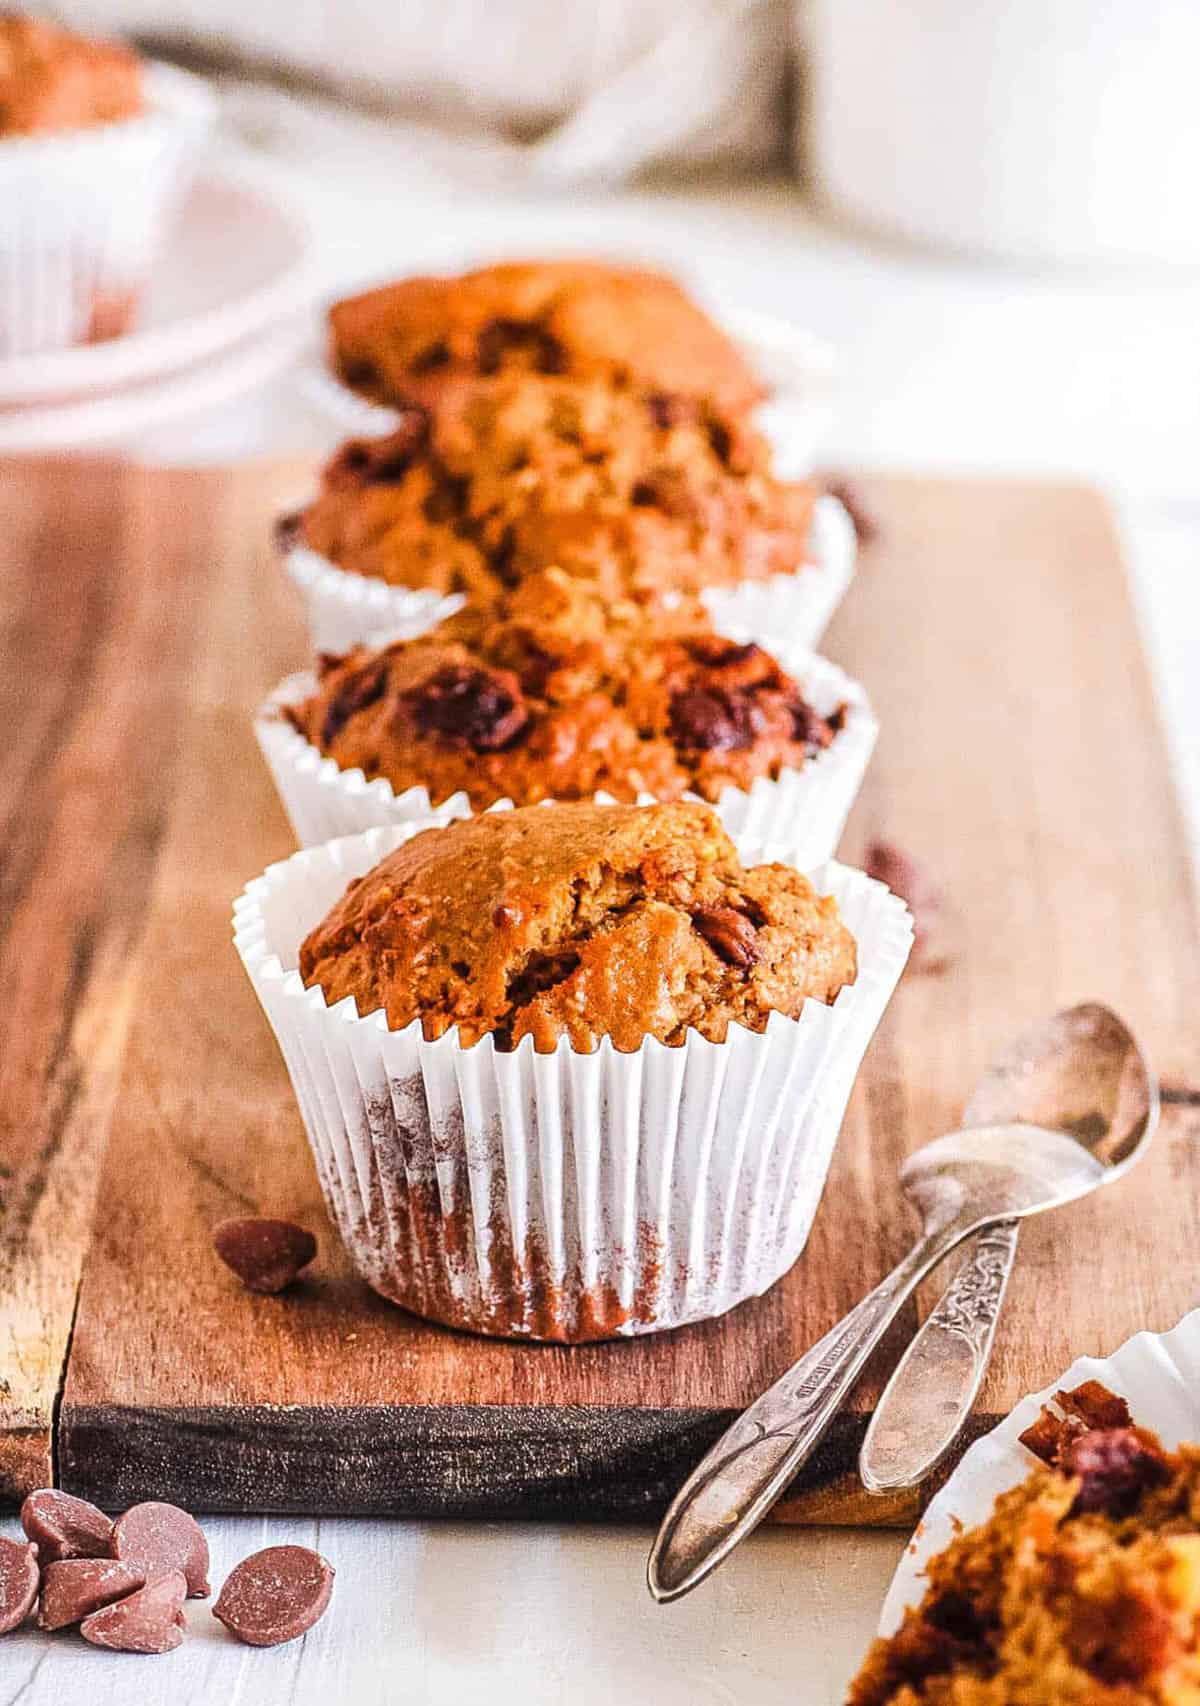 Easy peanut butter muffins with chocolate chips on a wooden cutting board.